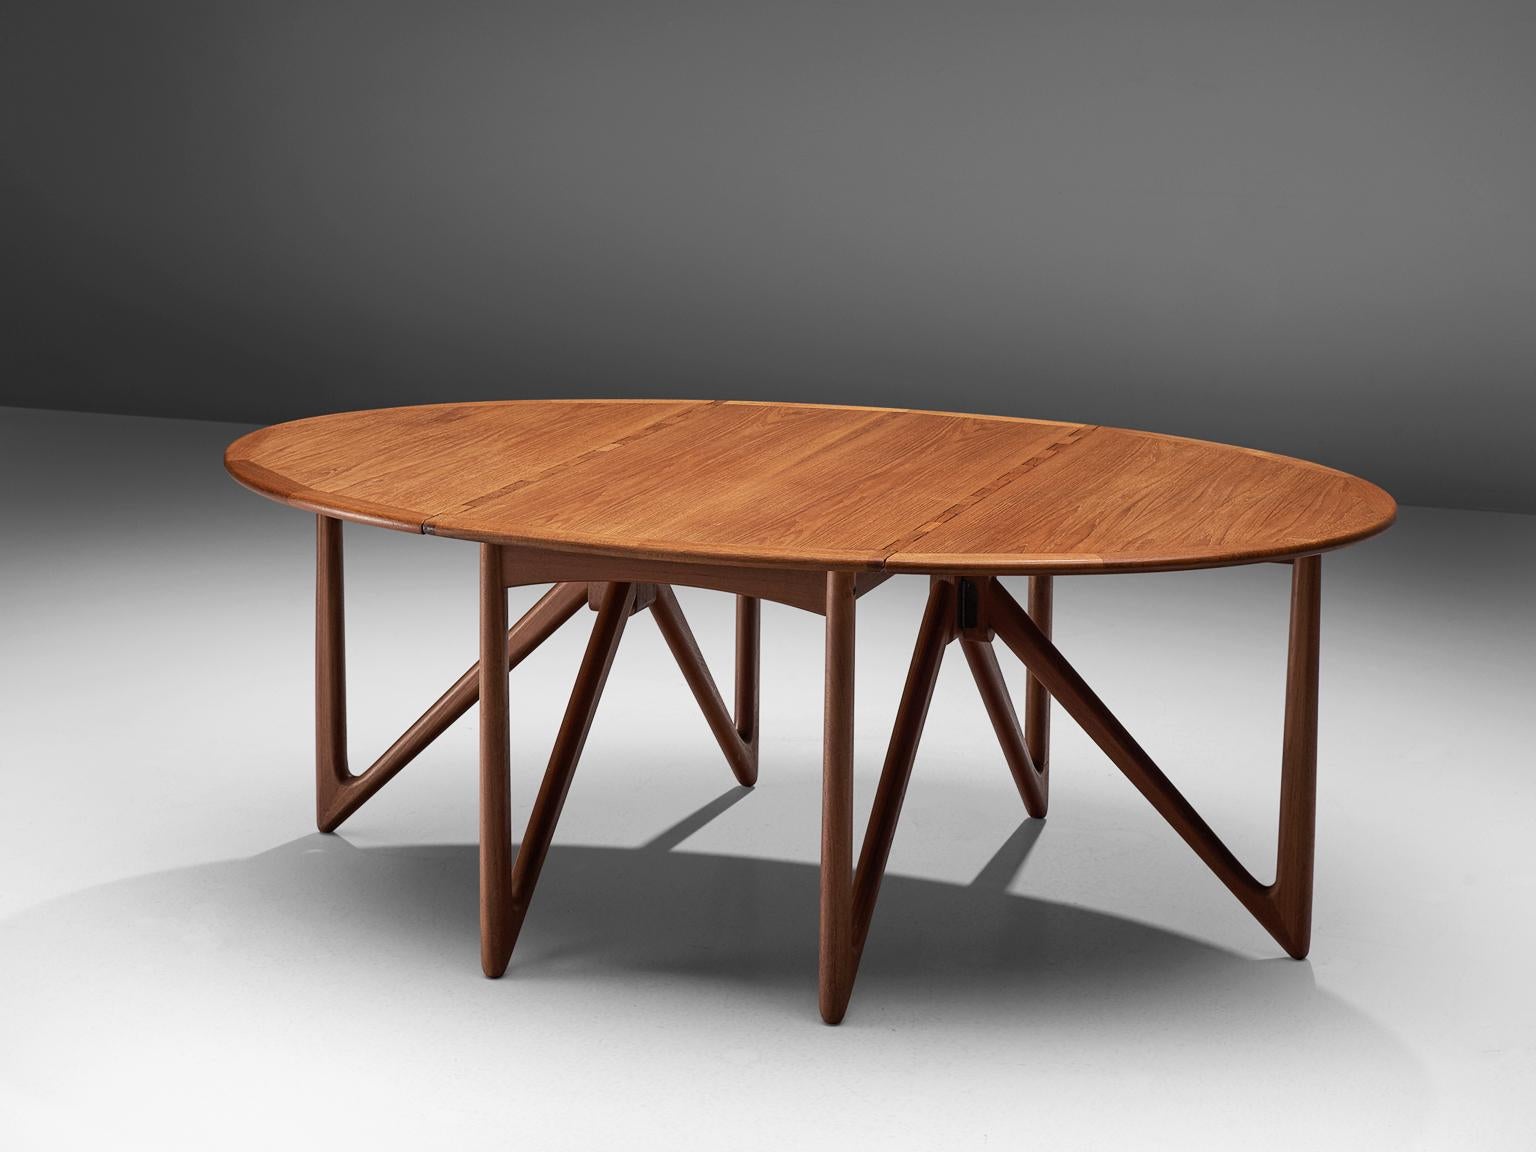 Kurt Østervig for Jason Mobler modern, oval table in teak, Denmark, 1960s.

This rare drop-leaf table shows an unusual, impressive base of six V-shaped legs, made with extraordinary craftsmanship. The clear shape of the oval top nicely contrasts